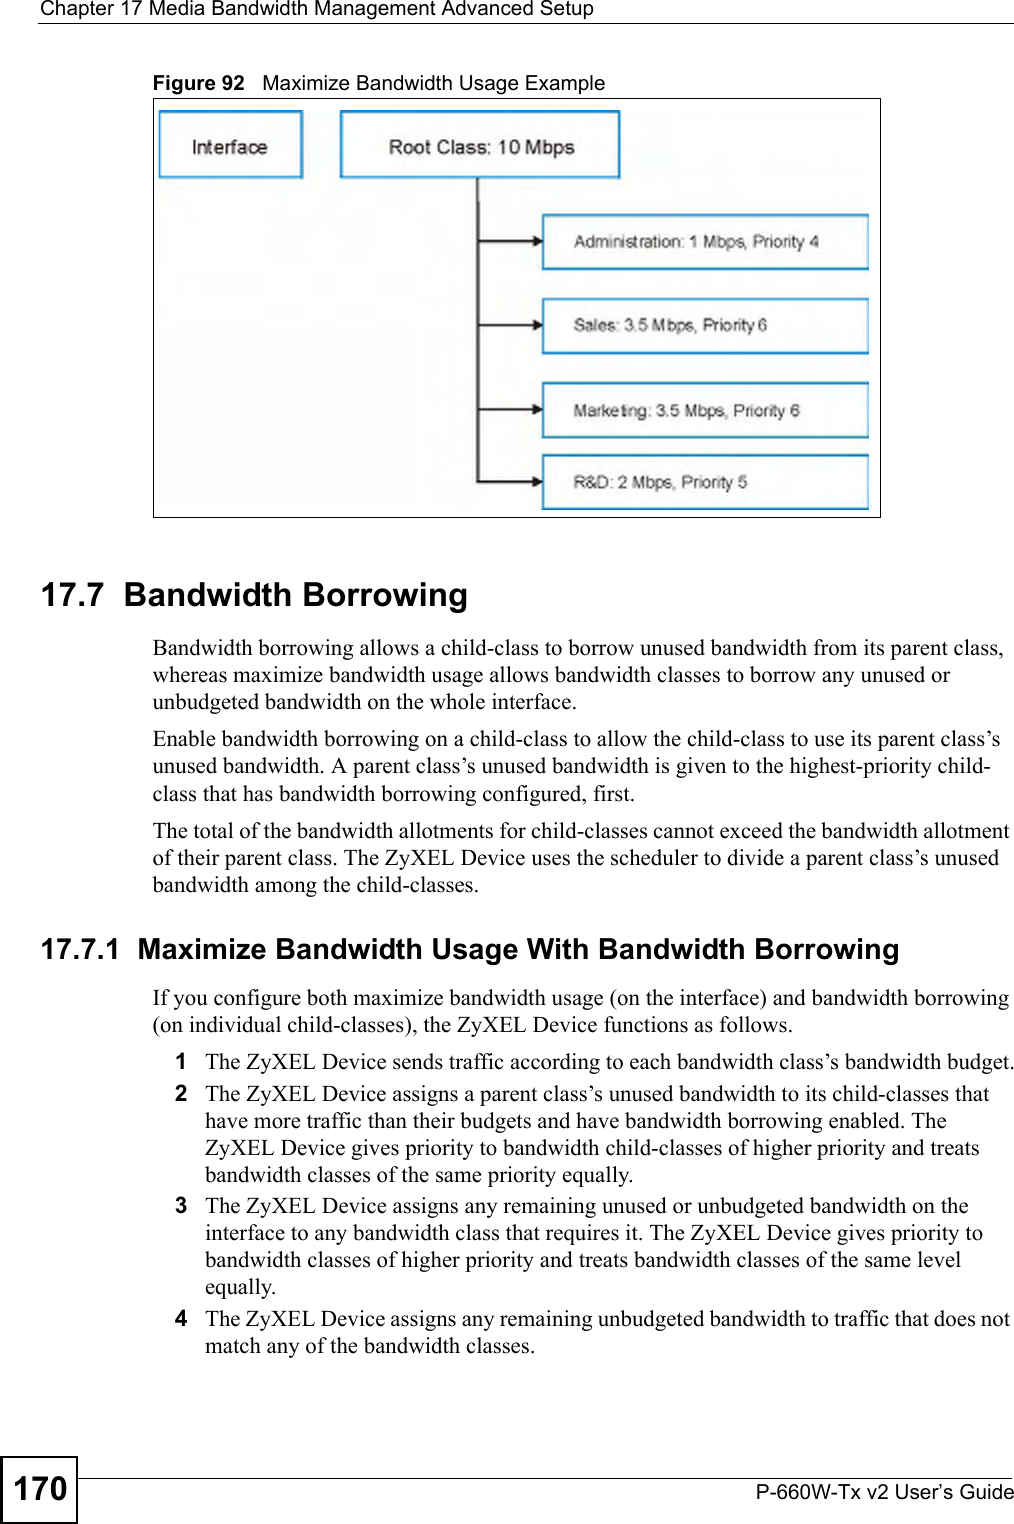 Chapter 17 Media Bandwidth Management Advanced SetupP-660W-Tx v2 User’s Guide170Figure 92   Maximize Bandwidth Usage Example17.7  Bandwidth BorrowingBandwidth borrowing allows a child-class to borrow unused bandwidth from its parent class, whereas maximize bandwidth usage allows bandwidth classes to borrow any unused or unbudgeted bandwidth on the whole interface.Enable bandwidth borrowing on a child-class to allow the child-class to use its parent class’s unused bandwidth. A parent class’s unused bandwidth is given to the highest-priority child-class that has bandwidth borrowing configured, first.The total of the bandwidth allotments for child-classes cannot exceed the bandwidth allotment of their parent class. The ZyXEL Device uses the scheduler to divide a parent class’s unused bandwidth among the child-classes. 17.7.1  Maximize Bandwidth Usage With Bandwidth BorrowingIf you configure both maximize bandwidth usage (on the interface) and bandwidth borrowing (on individual child-classes), the ZyXEL Device functions as follows.1The ZyXEL Device sends traffic according to each bandwidth class’s bandwidth budget.2The ZyXEL Device assigns a parent class’s unused bandwidth to its child-classes that have more traffic than their budgets and have bandwidth borrowing enabled. The ZyXEL Device gives priority to bandwidth child-classes of higher priority and treats bandwidth classes of the same priority equally.3The ZyXEL Device assigns any remaining unused or unbudgeted bandwidth on the interface to any bandwidth class that requires it. The ZyXEL Device gives priority to bandwidth classes of higher priority and treats bandwidth classes of the same level equally.4The ZyXEL Device assigns any remaining unbudgeted bandwidth to traffic that does not match any of the bandwidth classes.